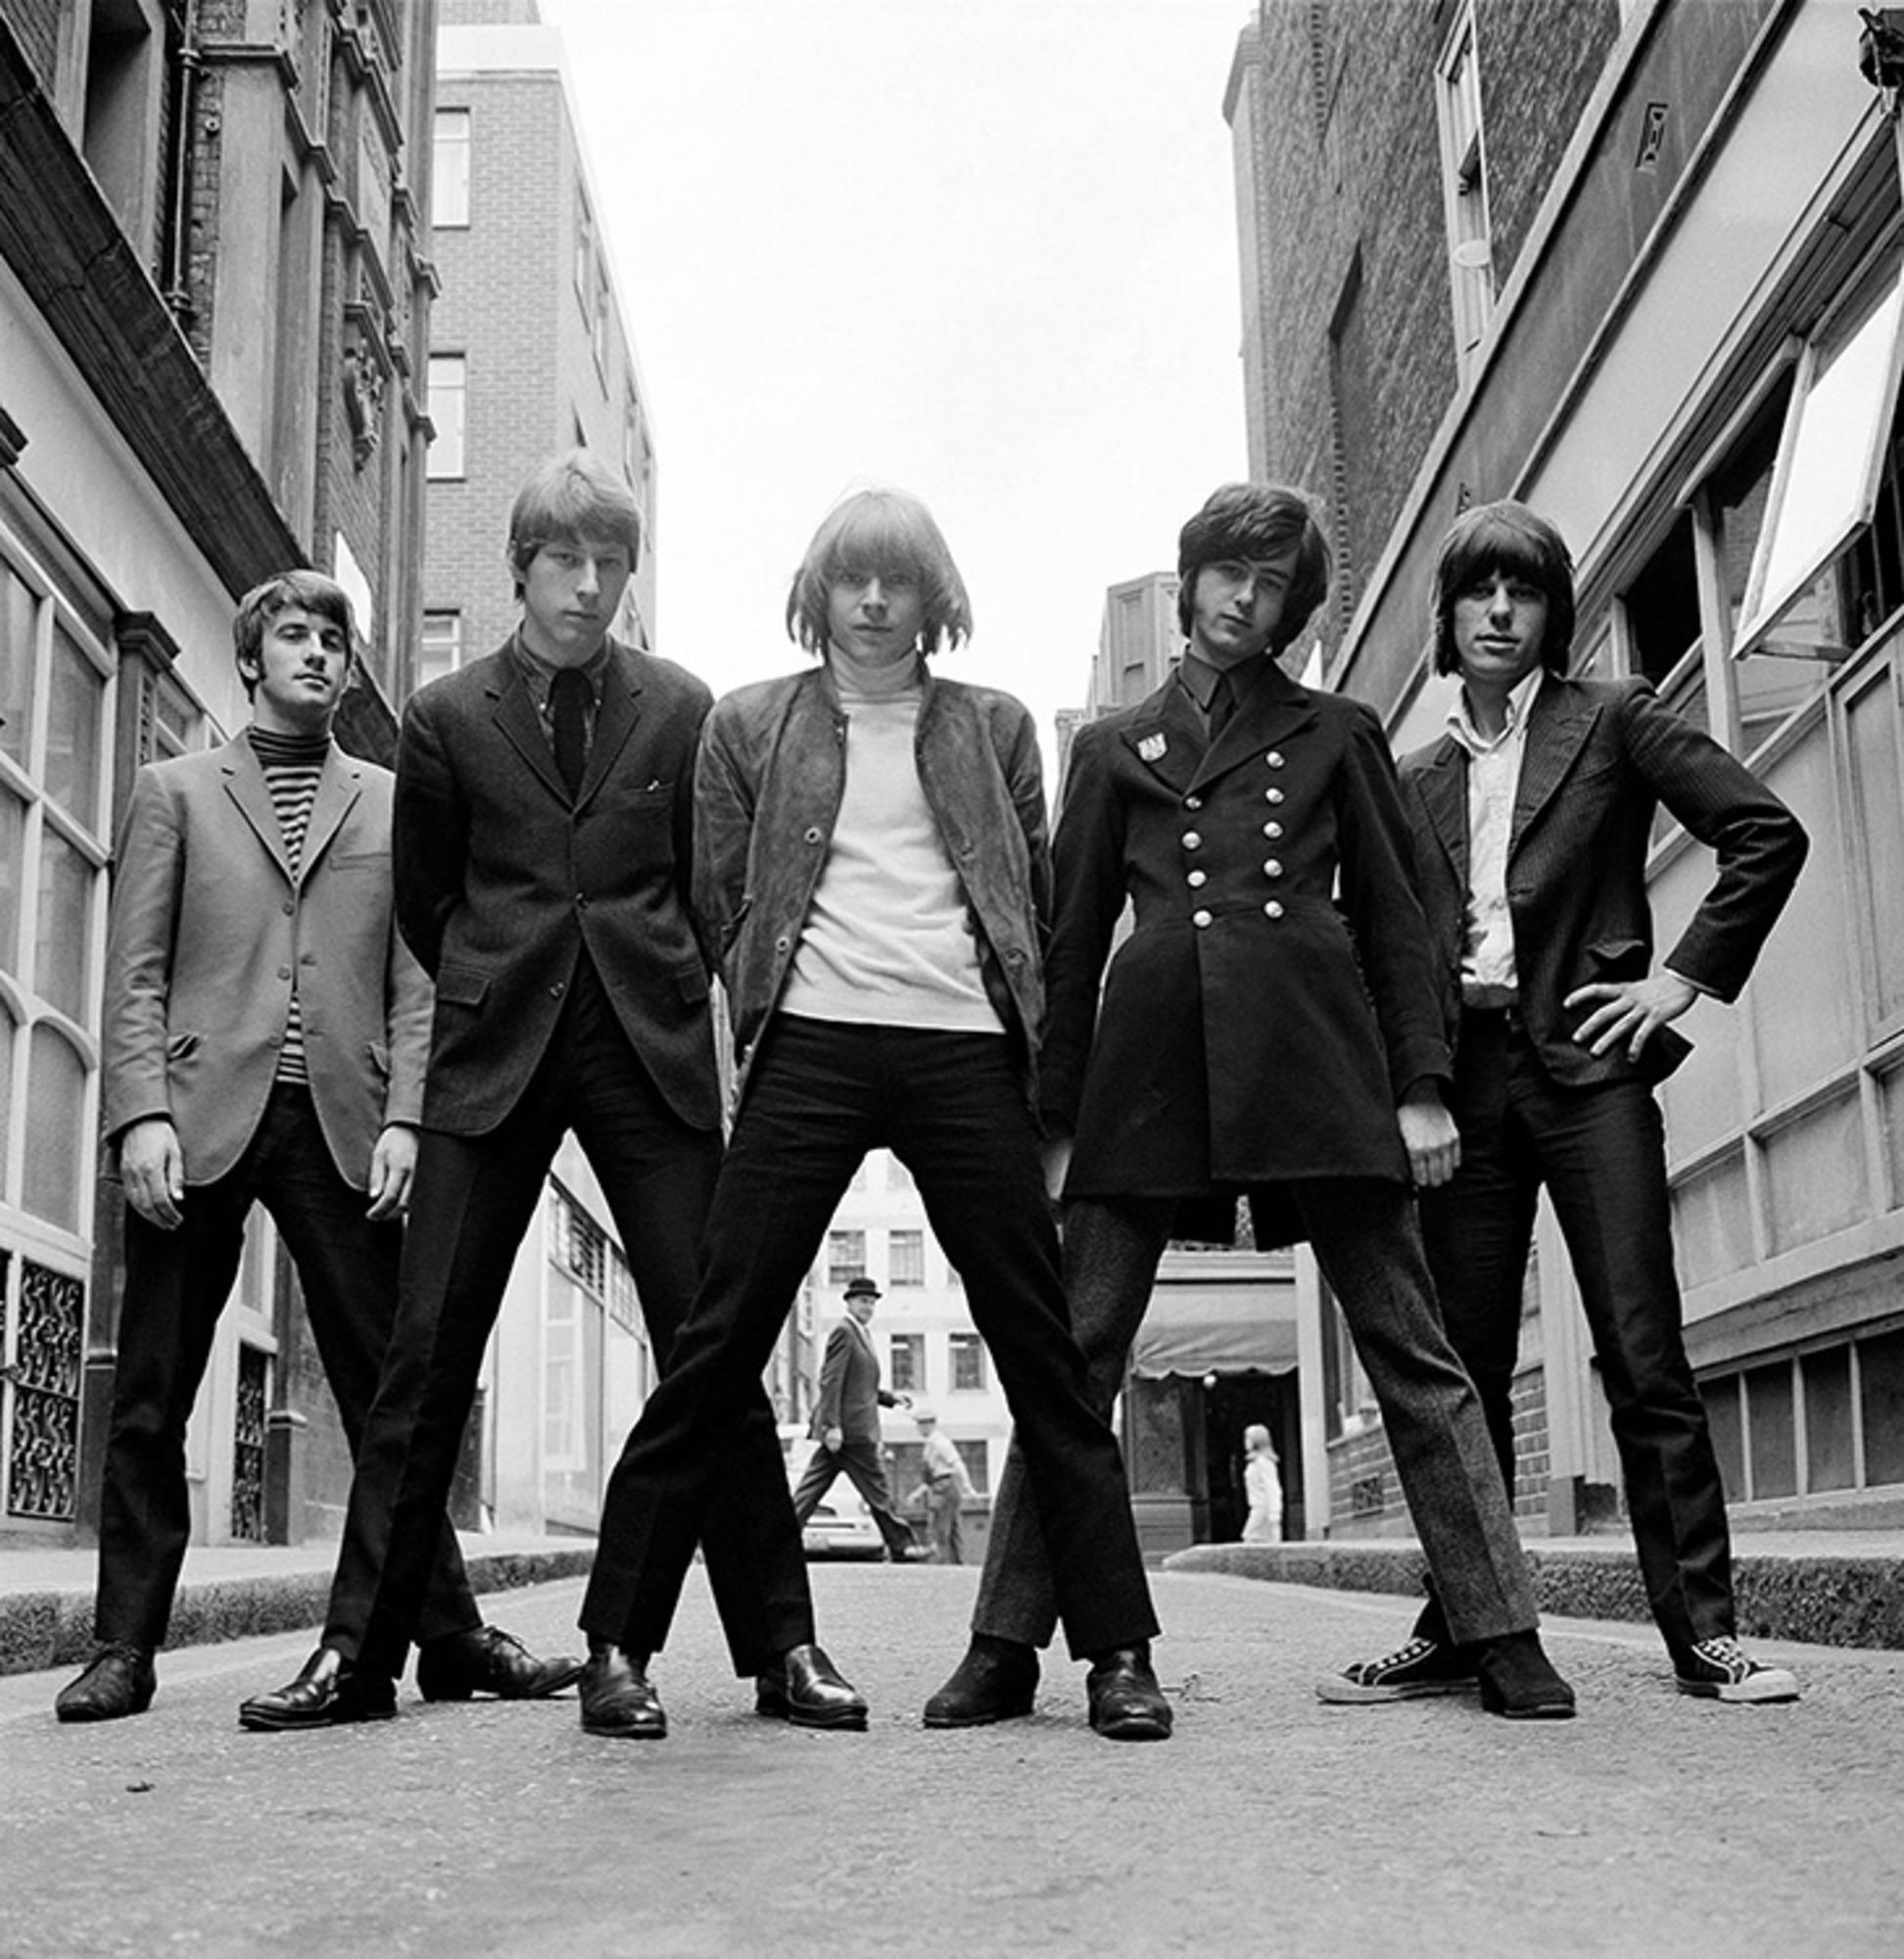 Gelatin-silver, signed and numbered

British band The Yardbirds photographed at Ormond Yard, London, 1965.

Available Sizes:
16" x 20” Edition of 50
20" x 24” Edition of 50
30" x 40” Edition of 25
50” x 53” Edition of 24

This photograph will be